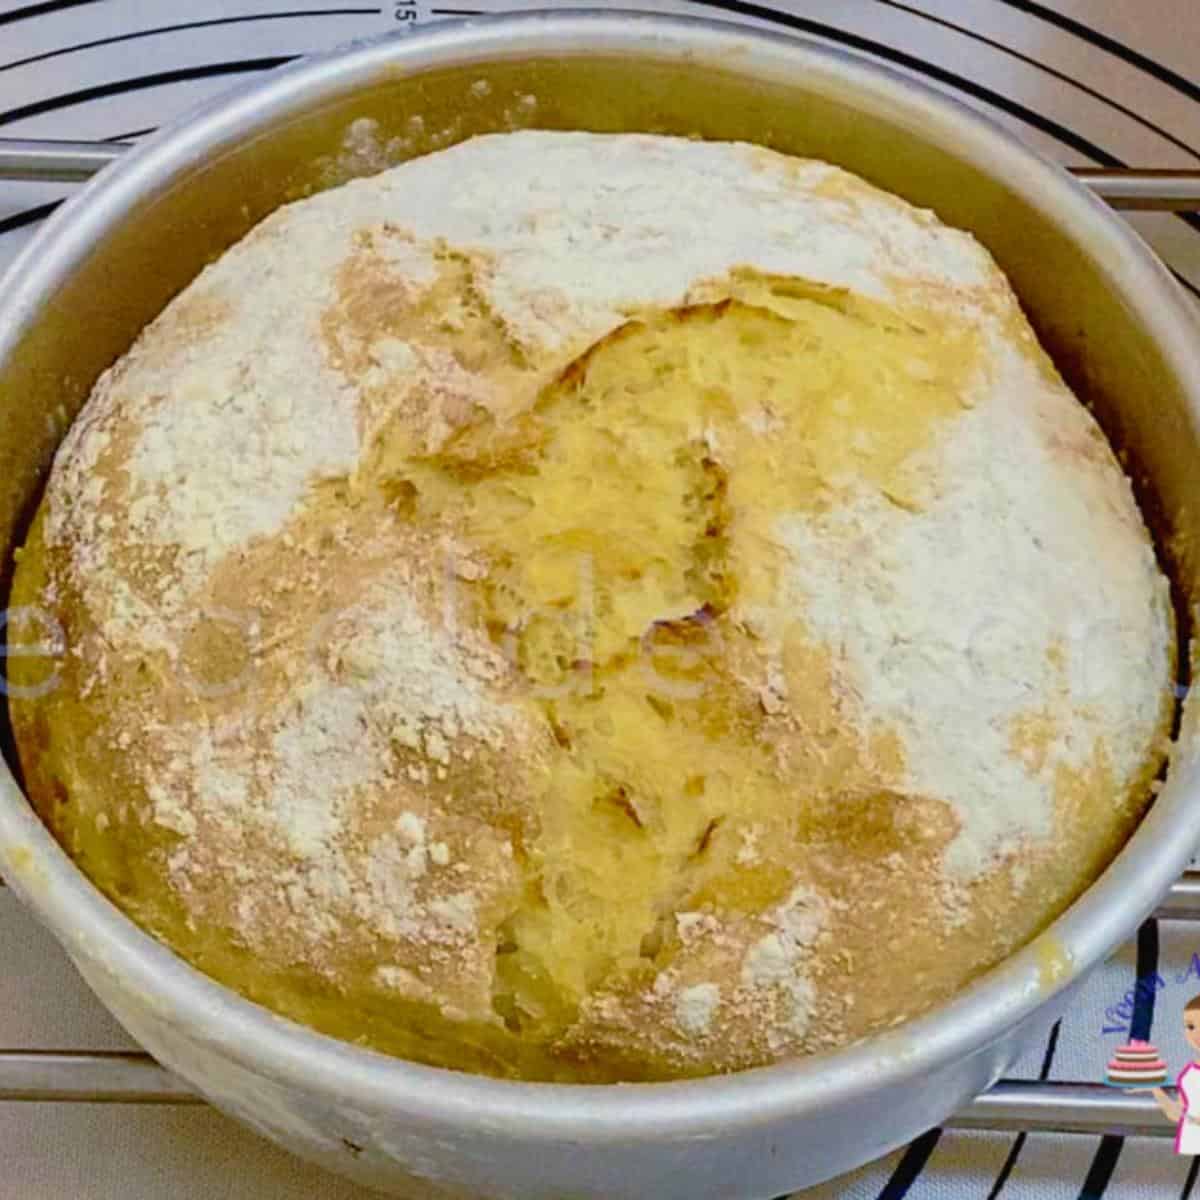 Baked bread in a 8-inch pan.